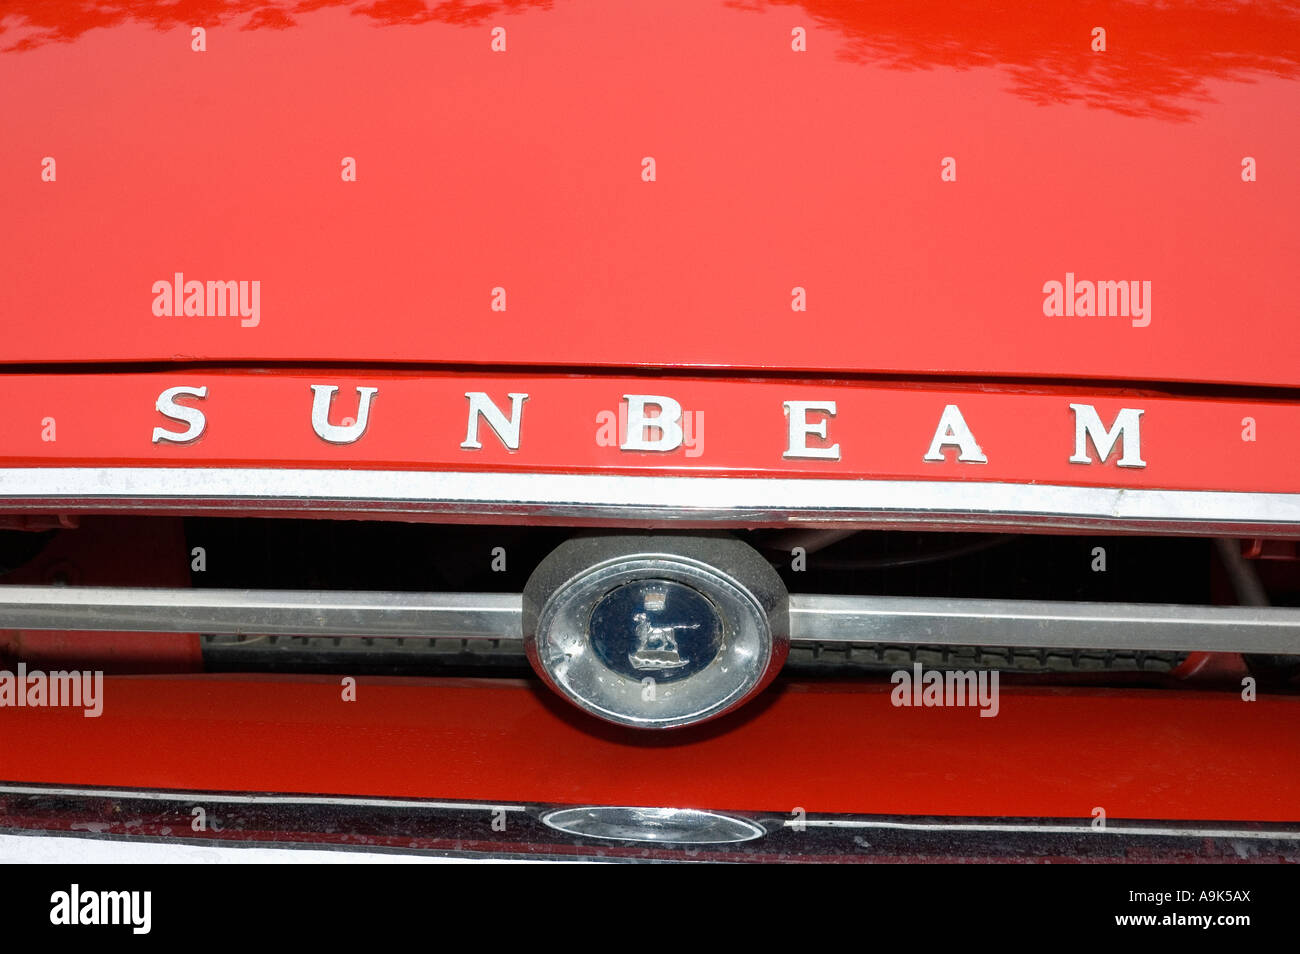 Classic Sunbeam Alpine car close up detail of grille and badge Stock Photo